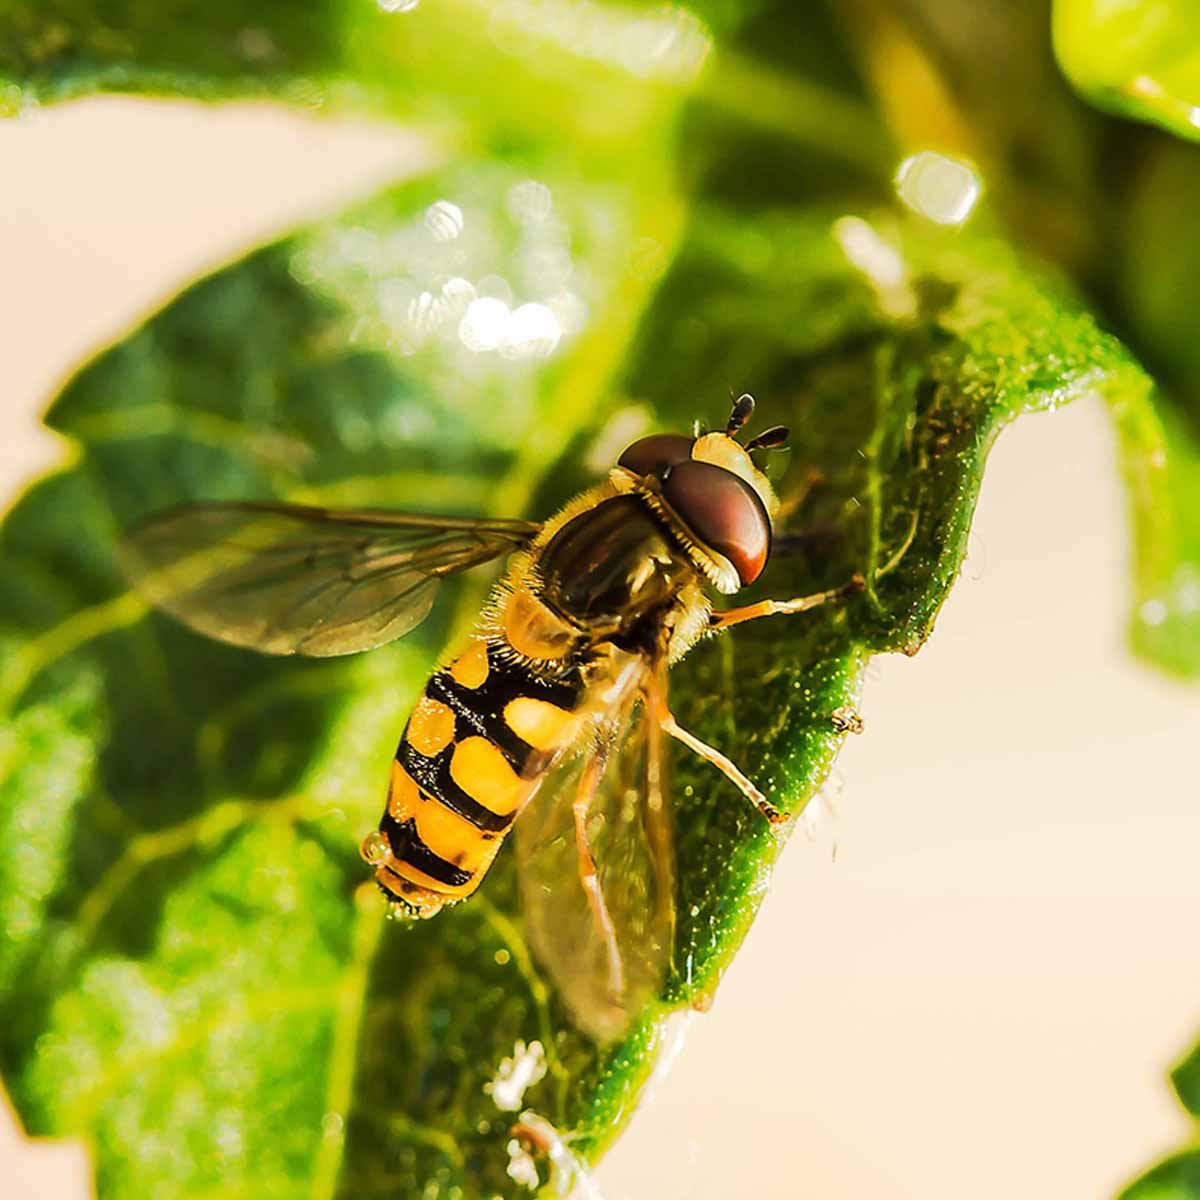 A yellow, black syrphid fly on leaf